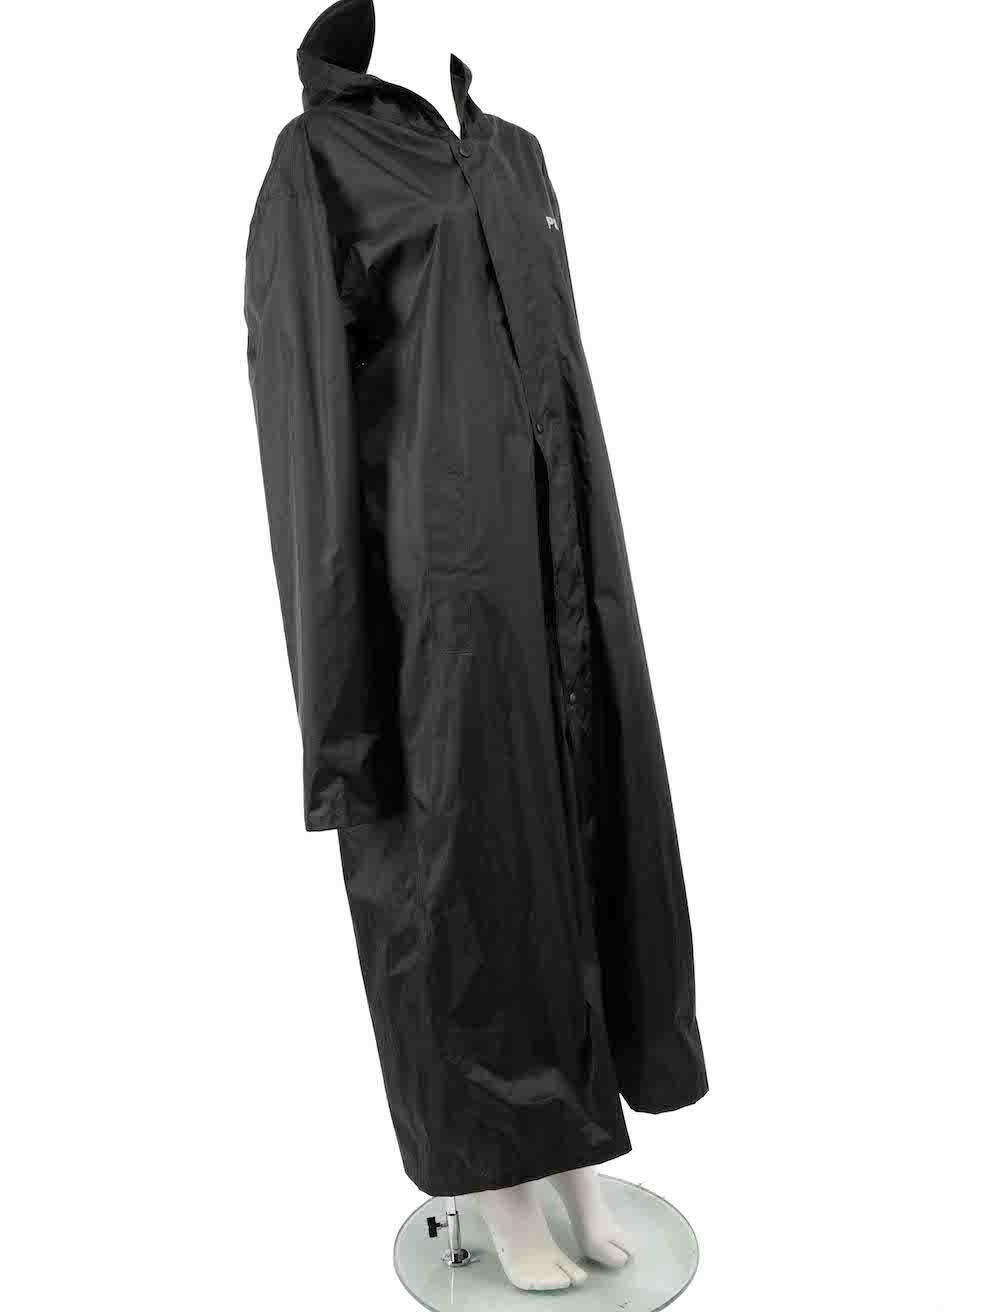 CONDITION is Good. Minor wear to coat is evident. Light scratches on the back logo of the coat. Overall marks is seen. The size label is missing on this used Vetements designer resale item.
 
 
 
 Details
 
 
 Black
 
 Polyester
 
 Raincoat
 
 Long